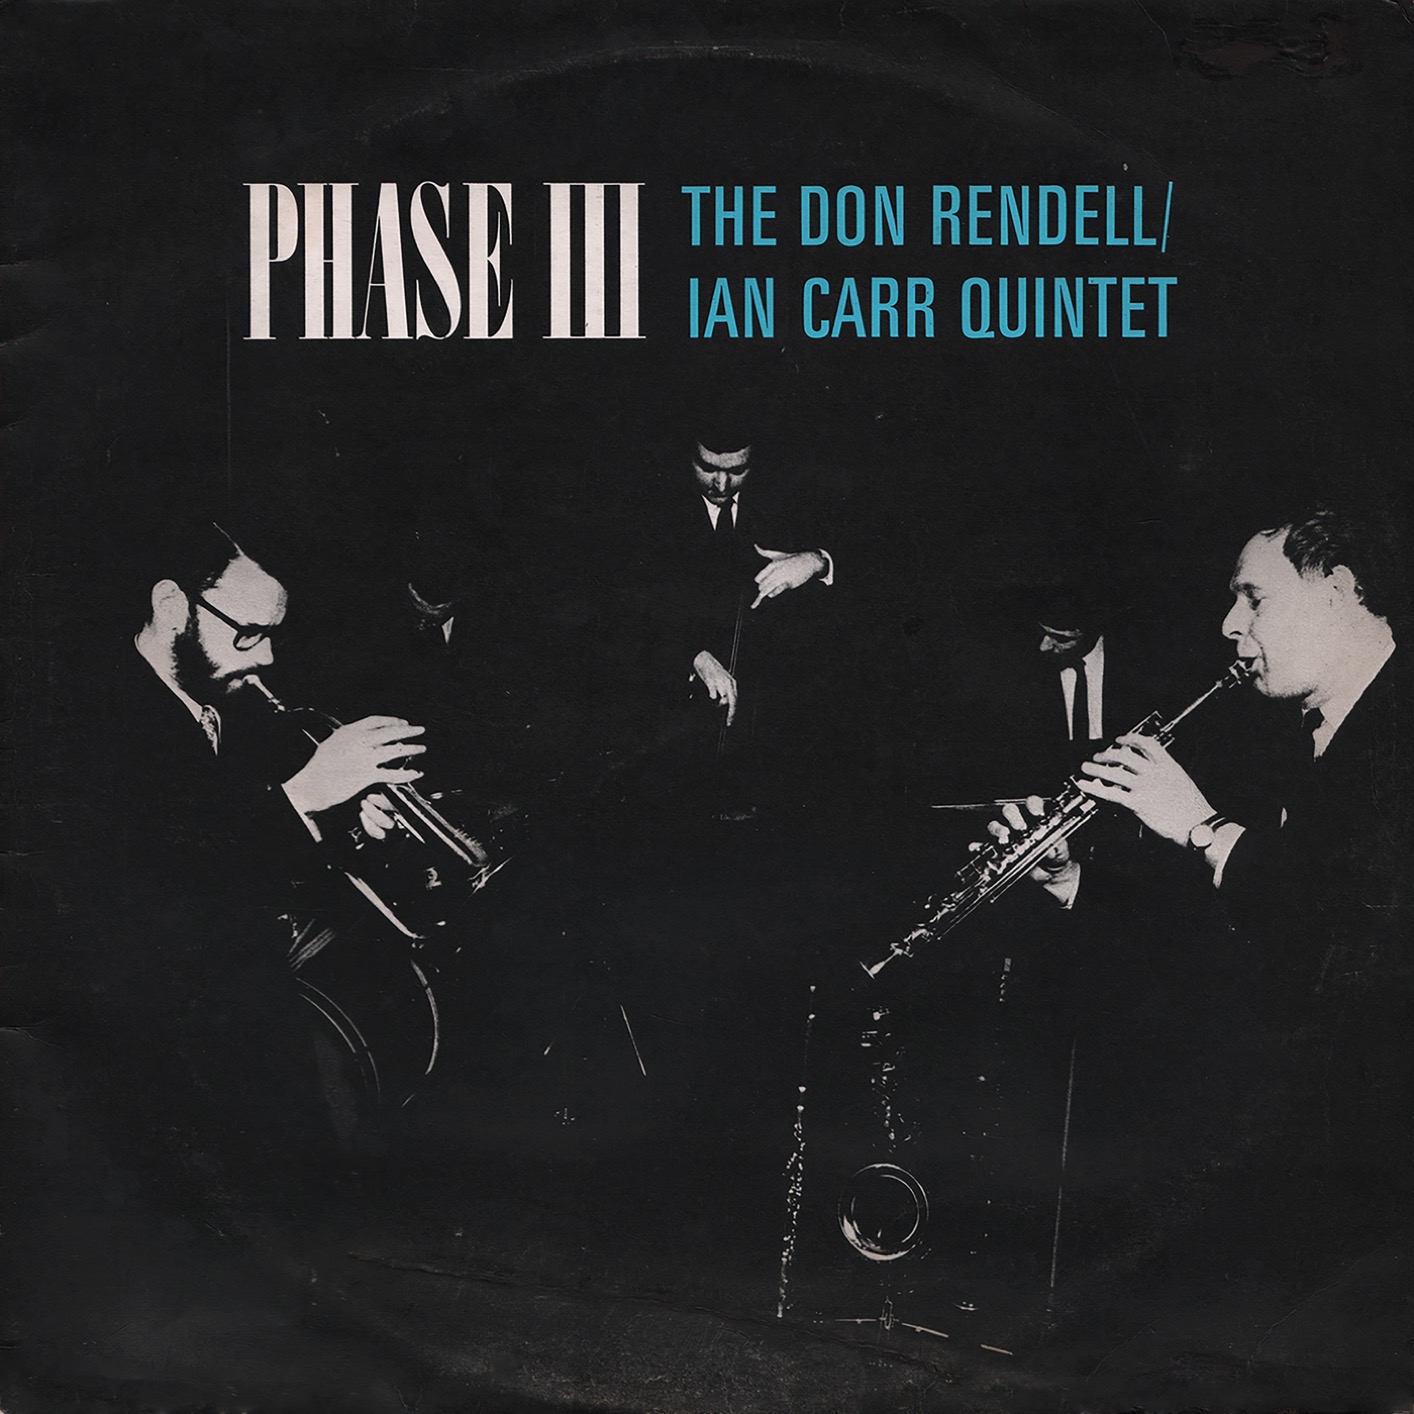 The Don Rendell / Ian Carr Quintet - Phase III (1968/2018) [FLAC 24bit/96kHz]